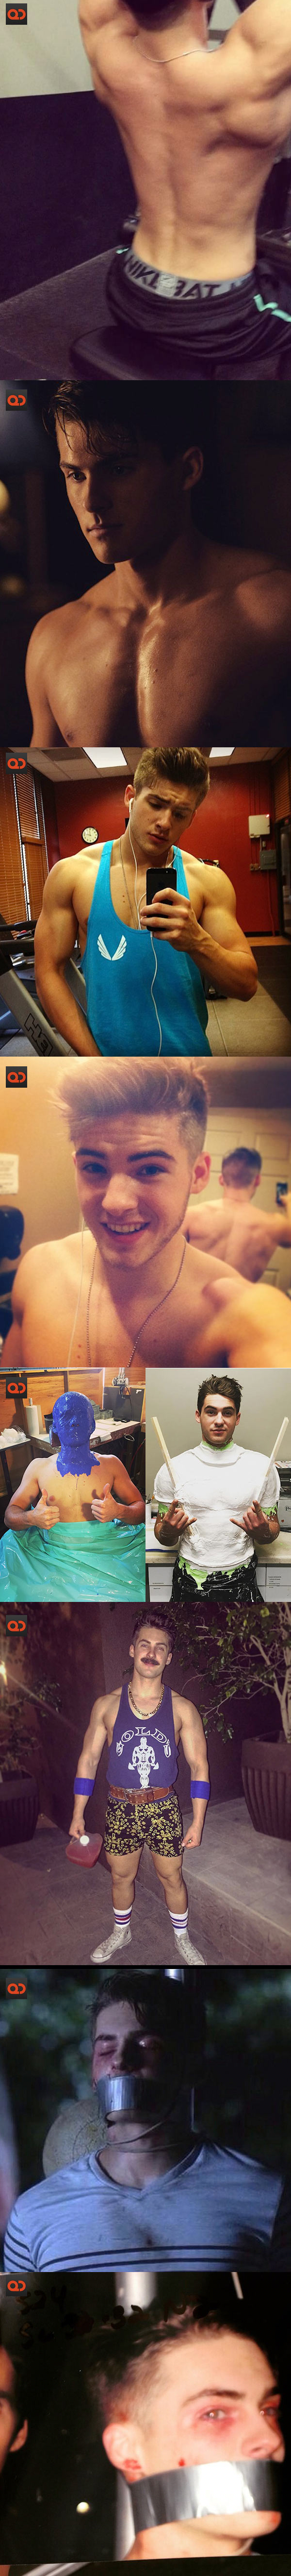 Cody Christian's Nude Video Gets A Second Wind - Which Teen Wolf Star Had The Best Leak, Him Or Tyler Posey?